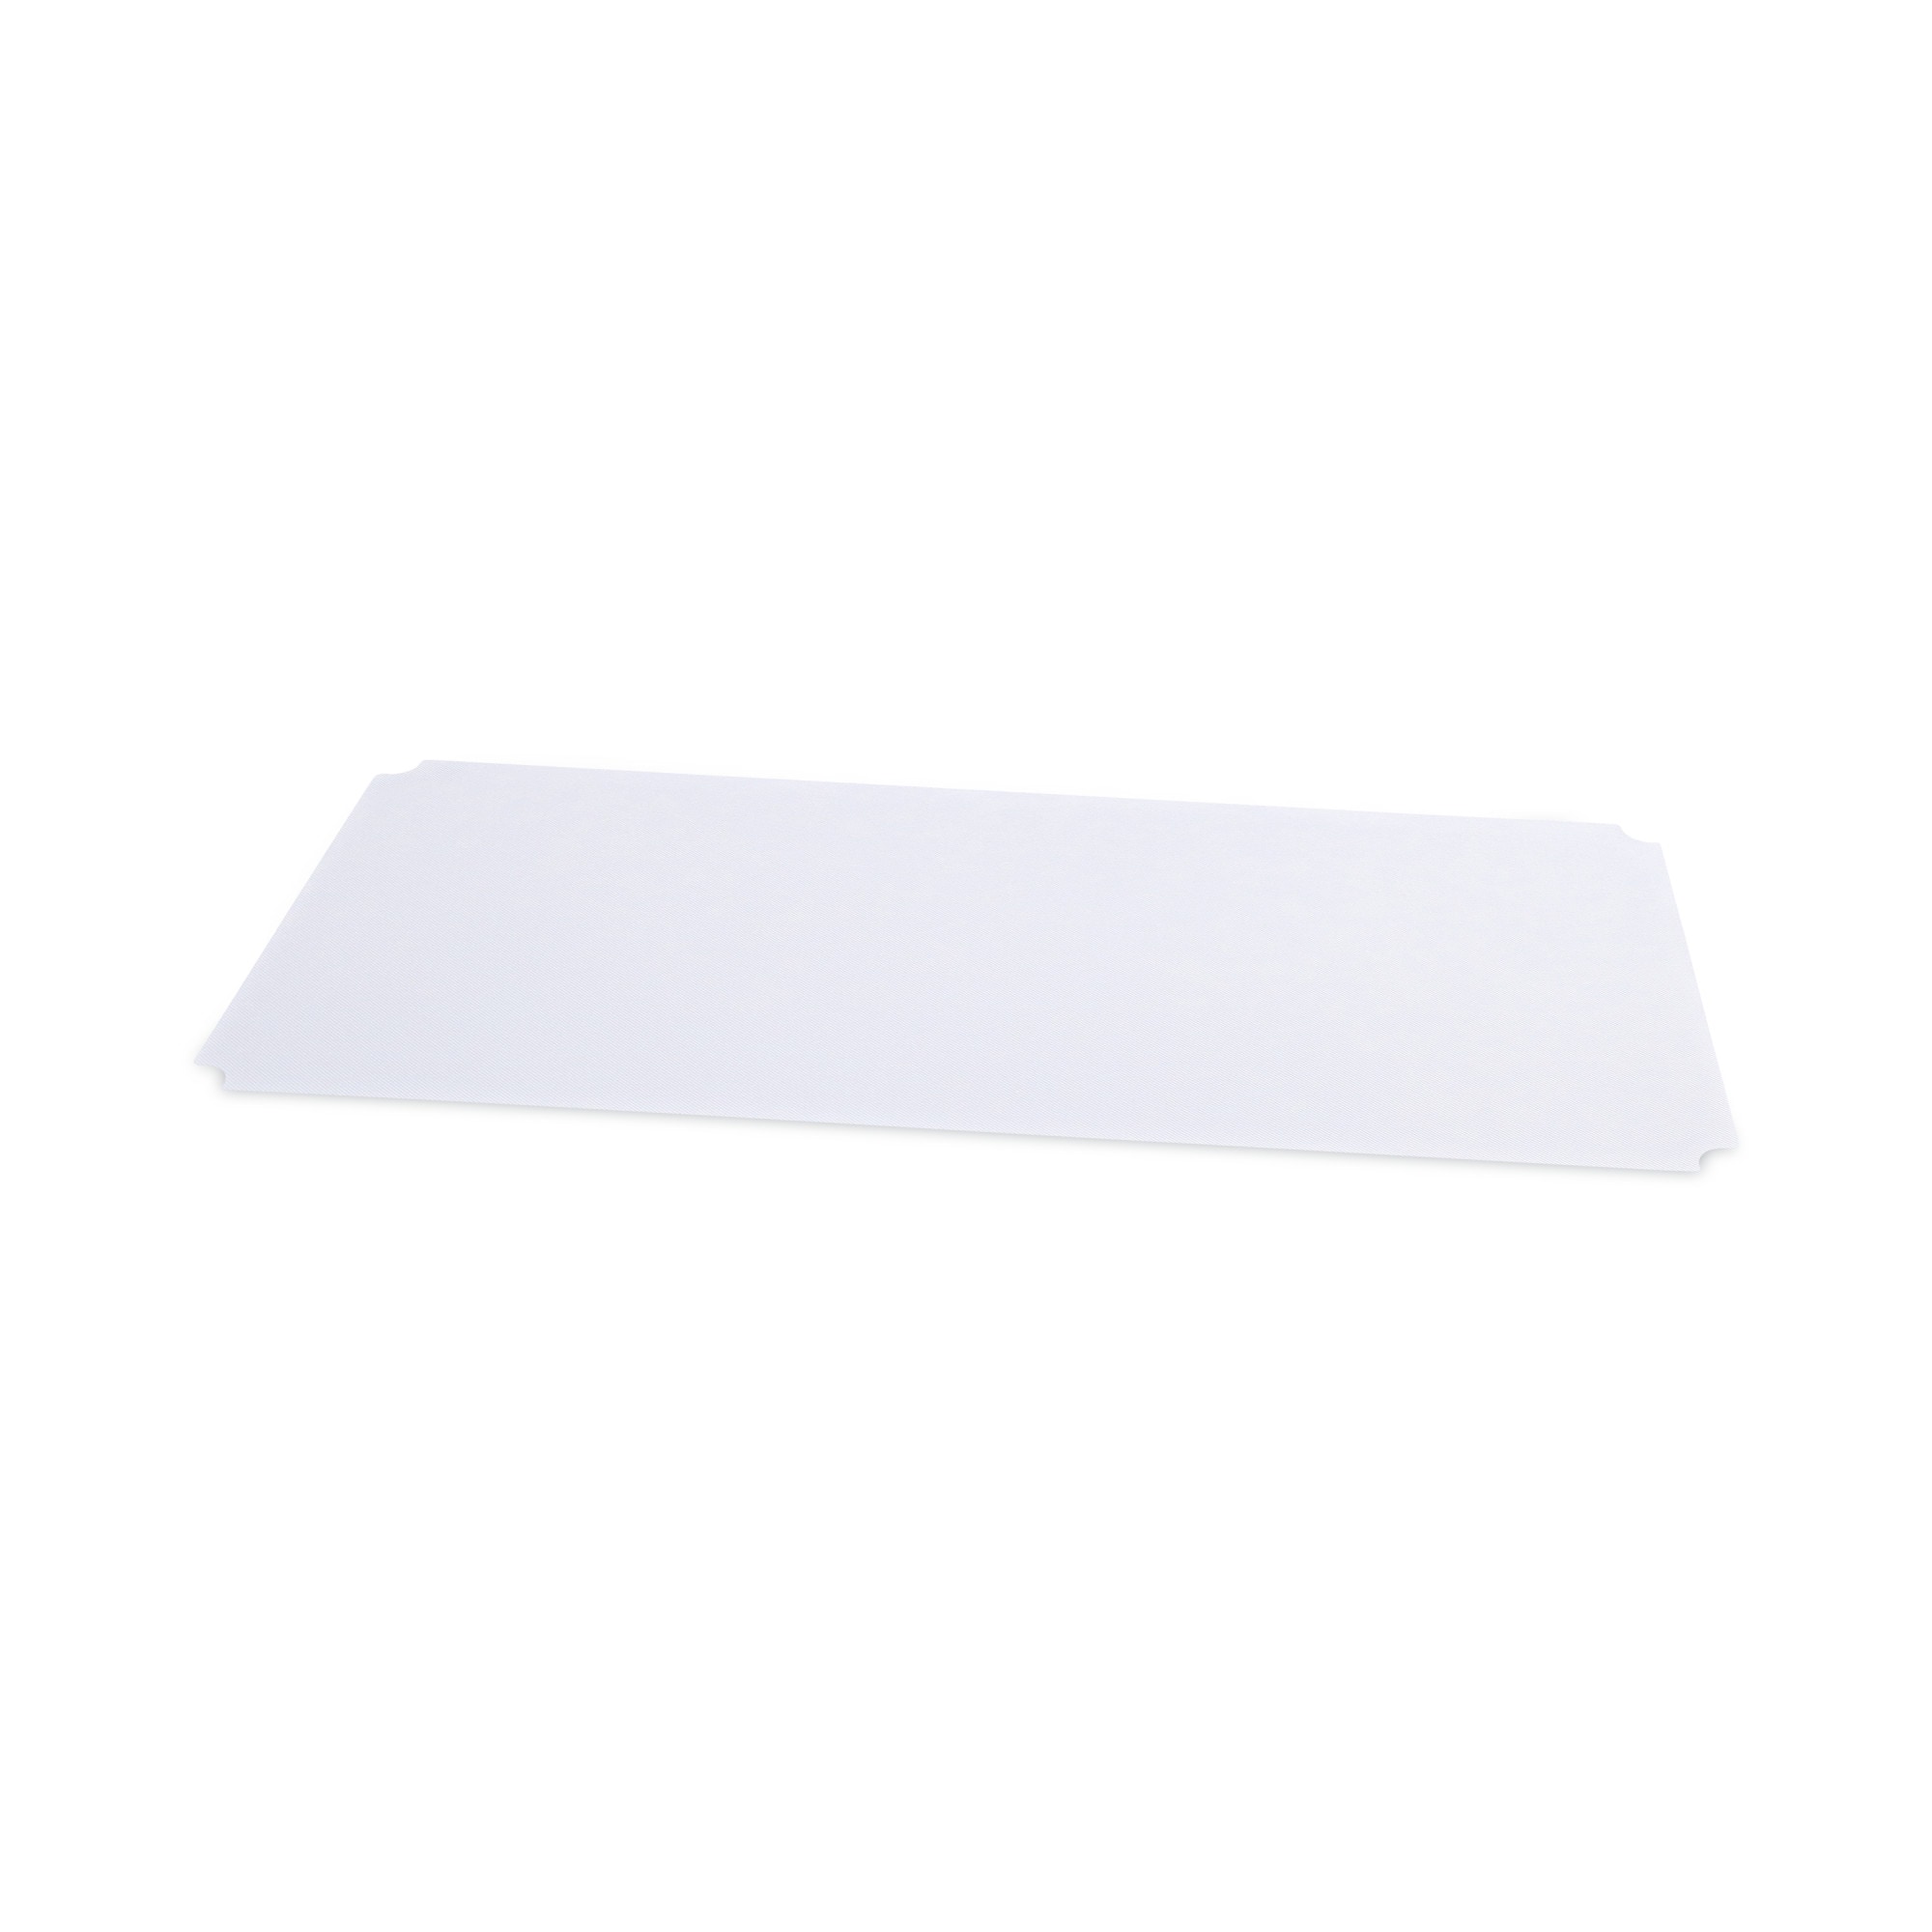 Shelf Liners 11 Inch Wide - Clear Easy to Cut Drawer Liners,(Pre-Cut Size  11 X 3